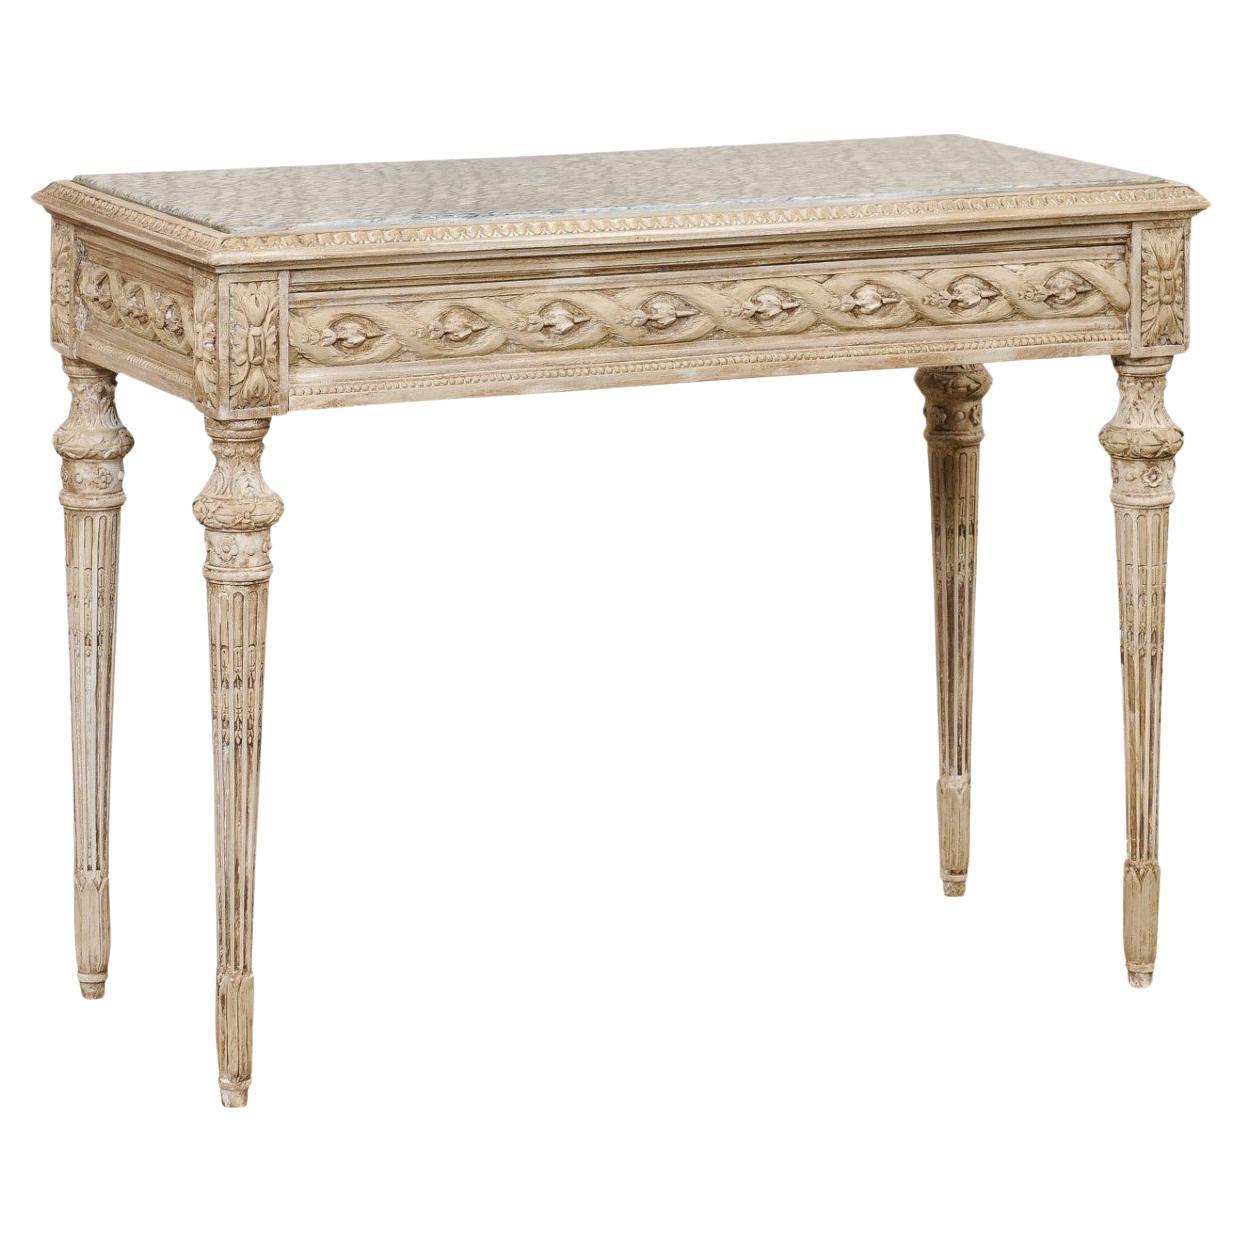 French Beautifully-Carved Marble Top Wooden Console w/Discreetly Hidden Drawer